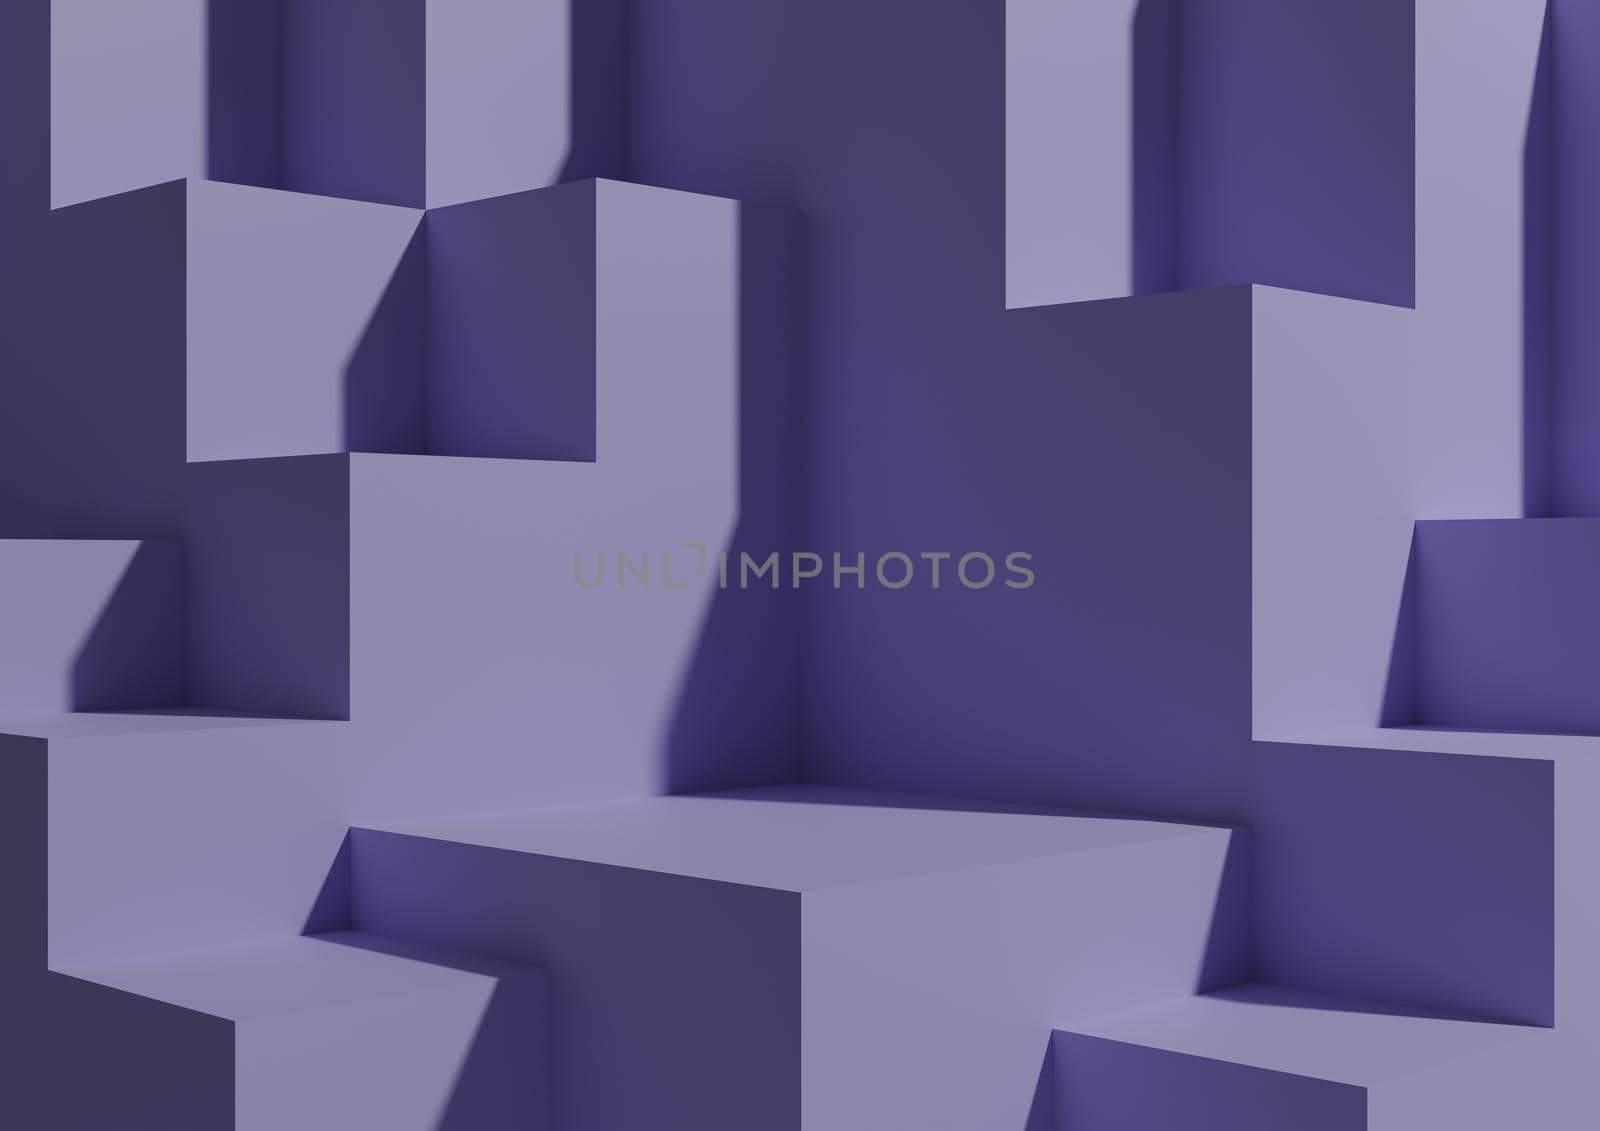 Minimal Light Pastel Purple Background 3D Studio Mockup Scene with Podiums and Levels for Product Display and Presentation. Geometric Horizontal Architectural Wallpaper.